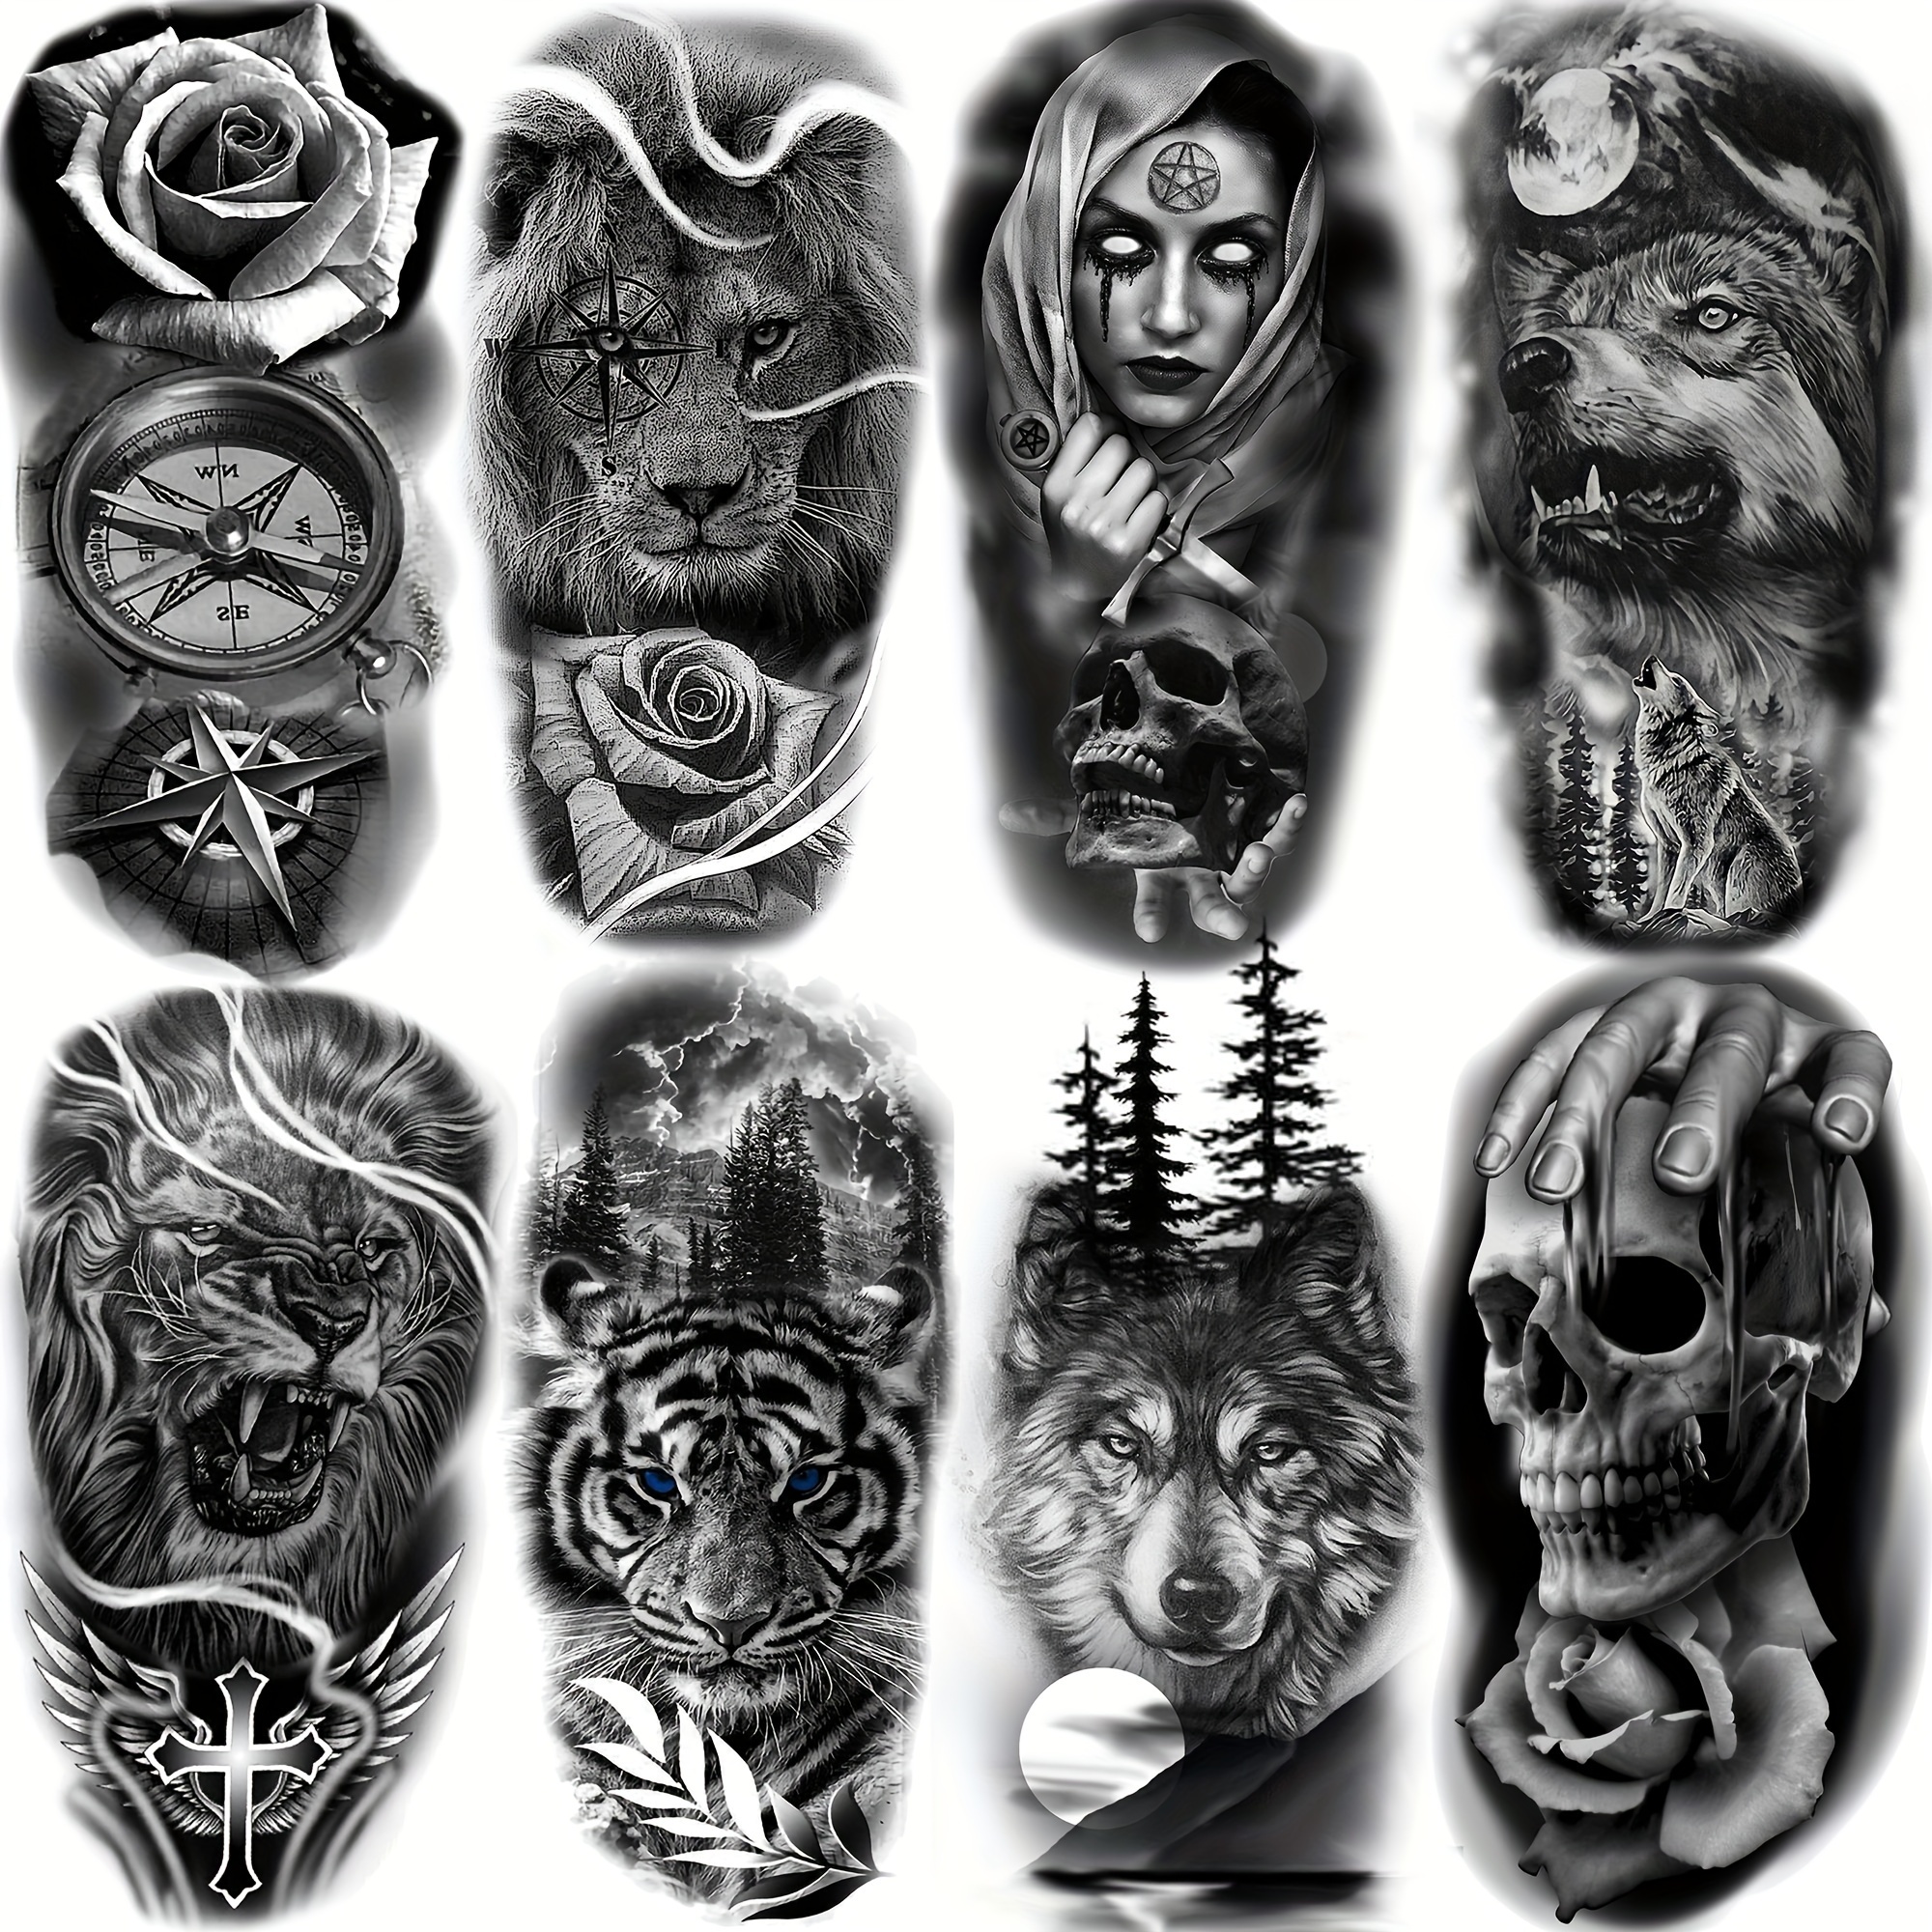 

8 Sheets Tribal Realistic Wolf Lion Tiger Temporary Tattoos For Men Women Arm Legs Forearm Hands, Black Forest Flower Rose Fake Arm Sleeve Tattoo Stickers For Adults